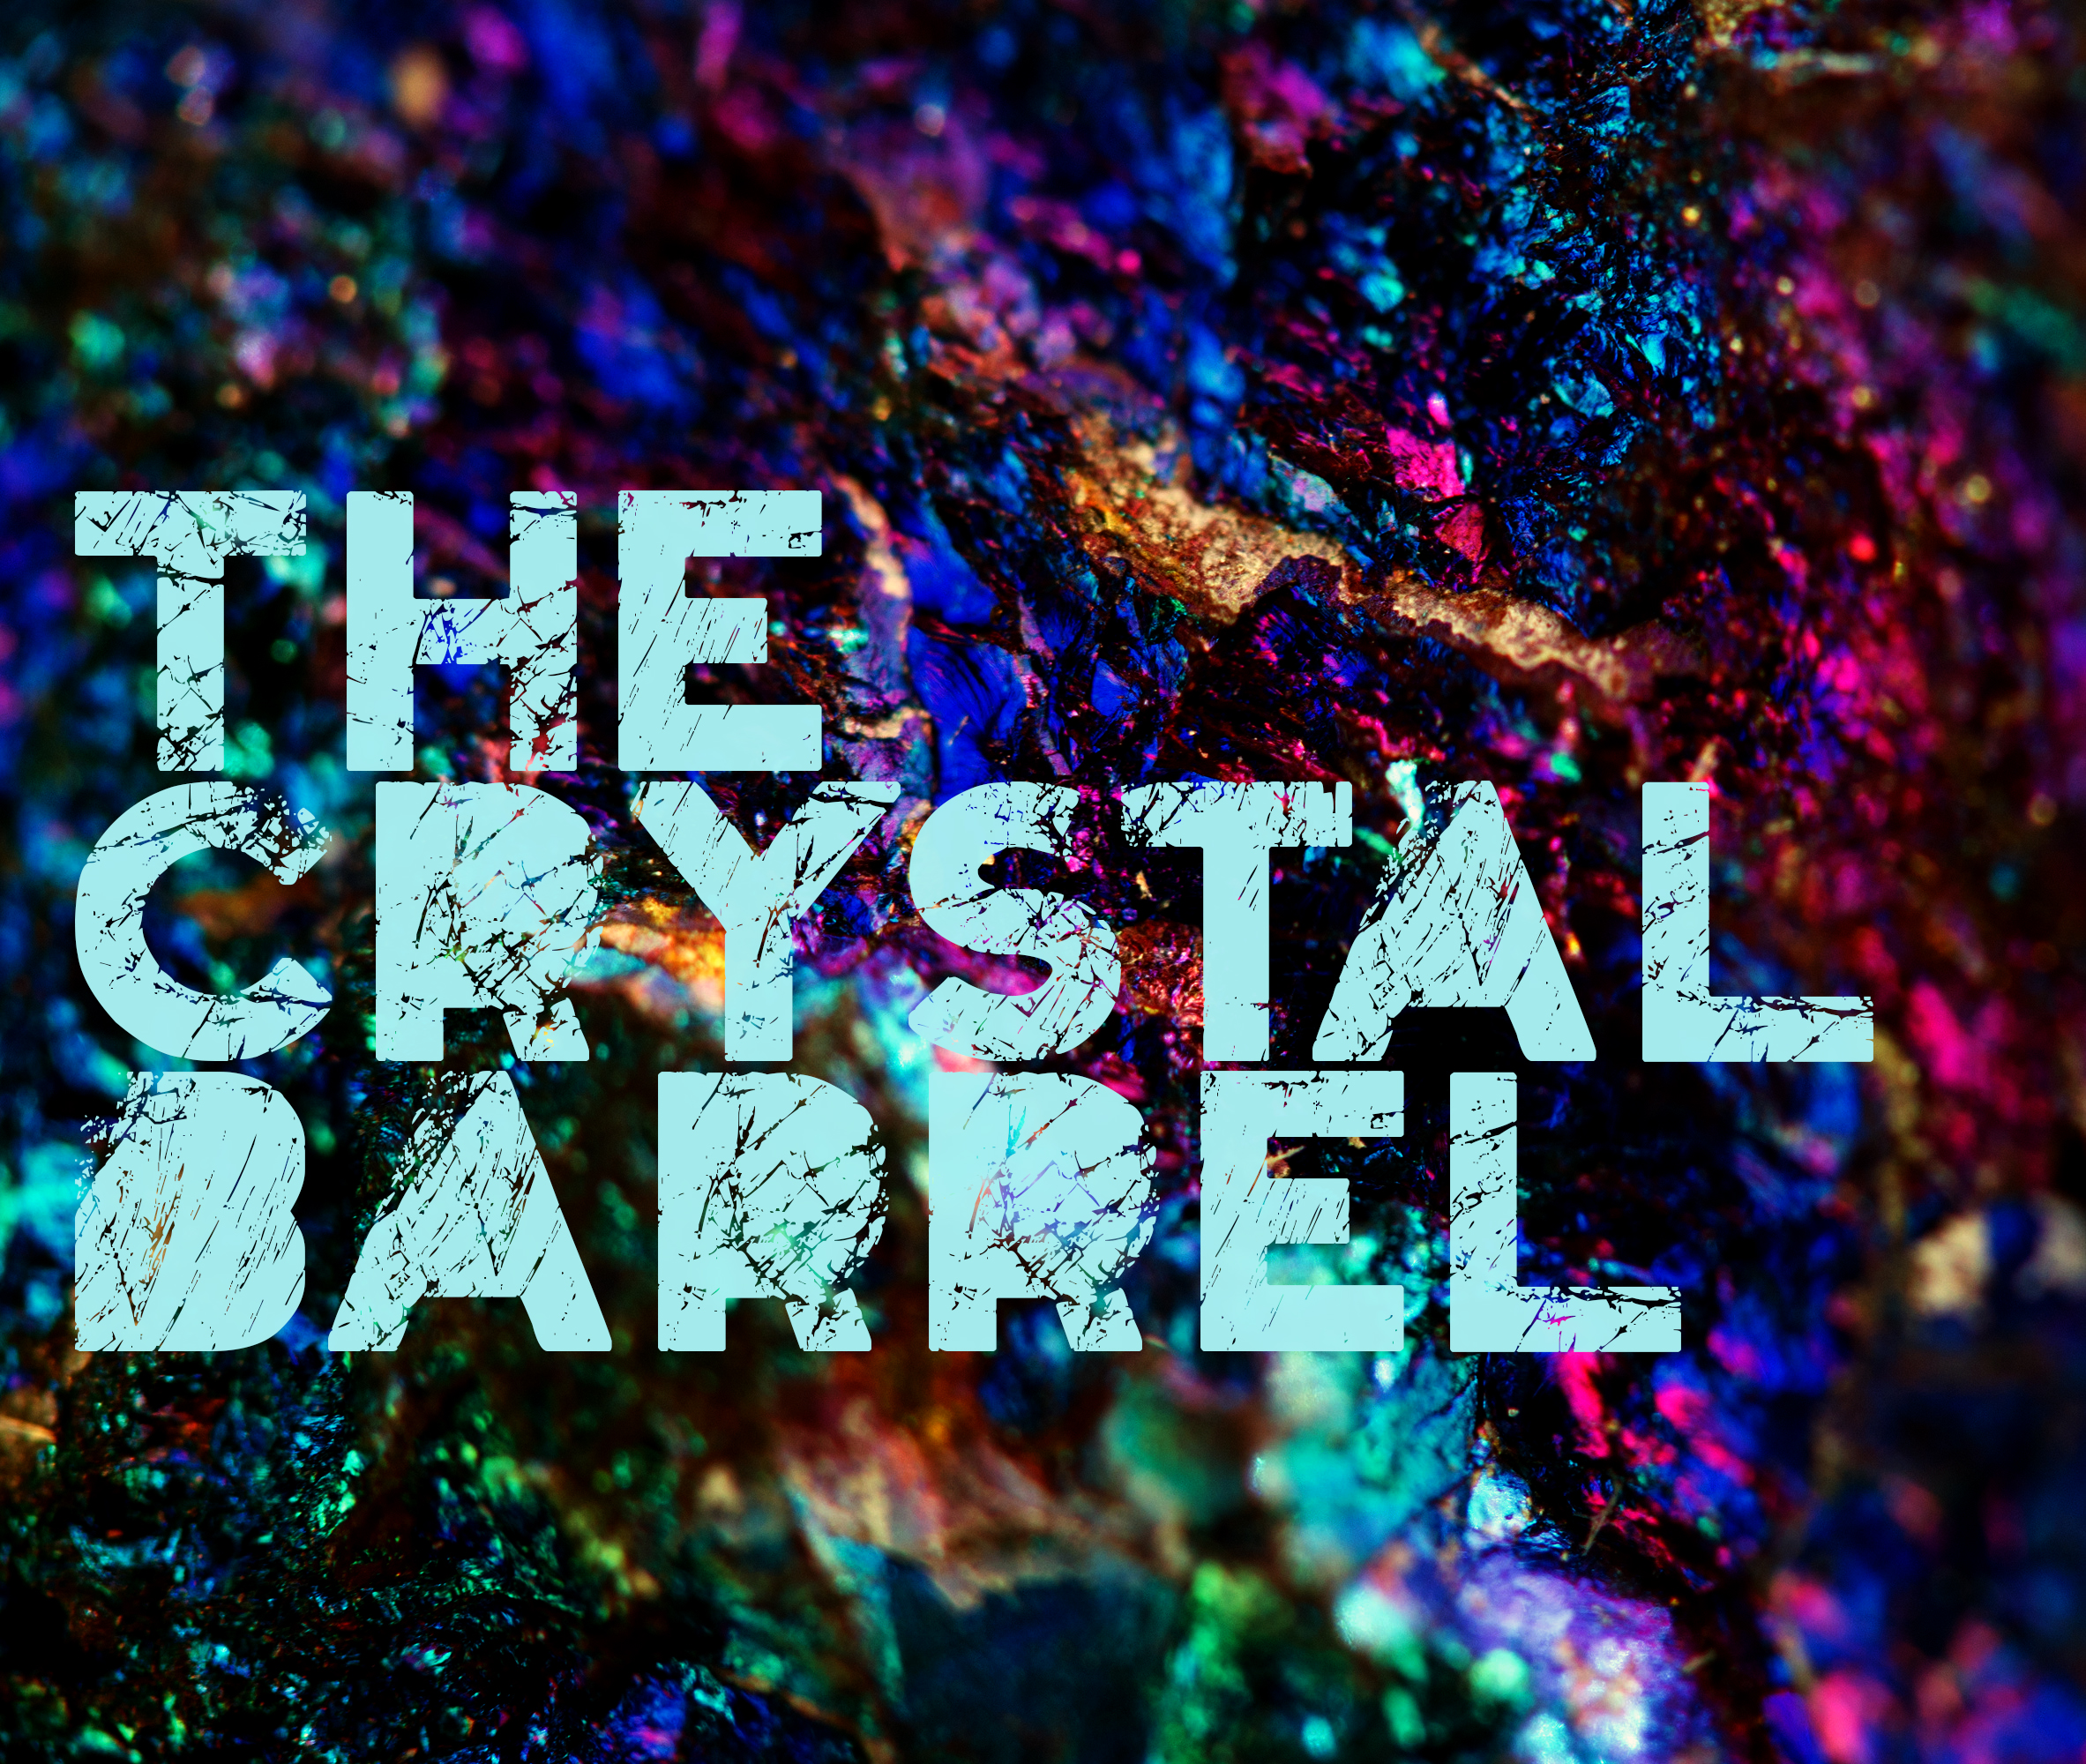 Protected: The Crystal Barrel